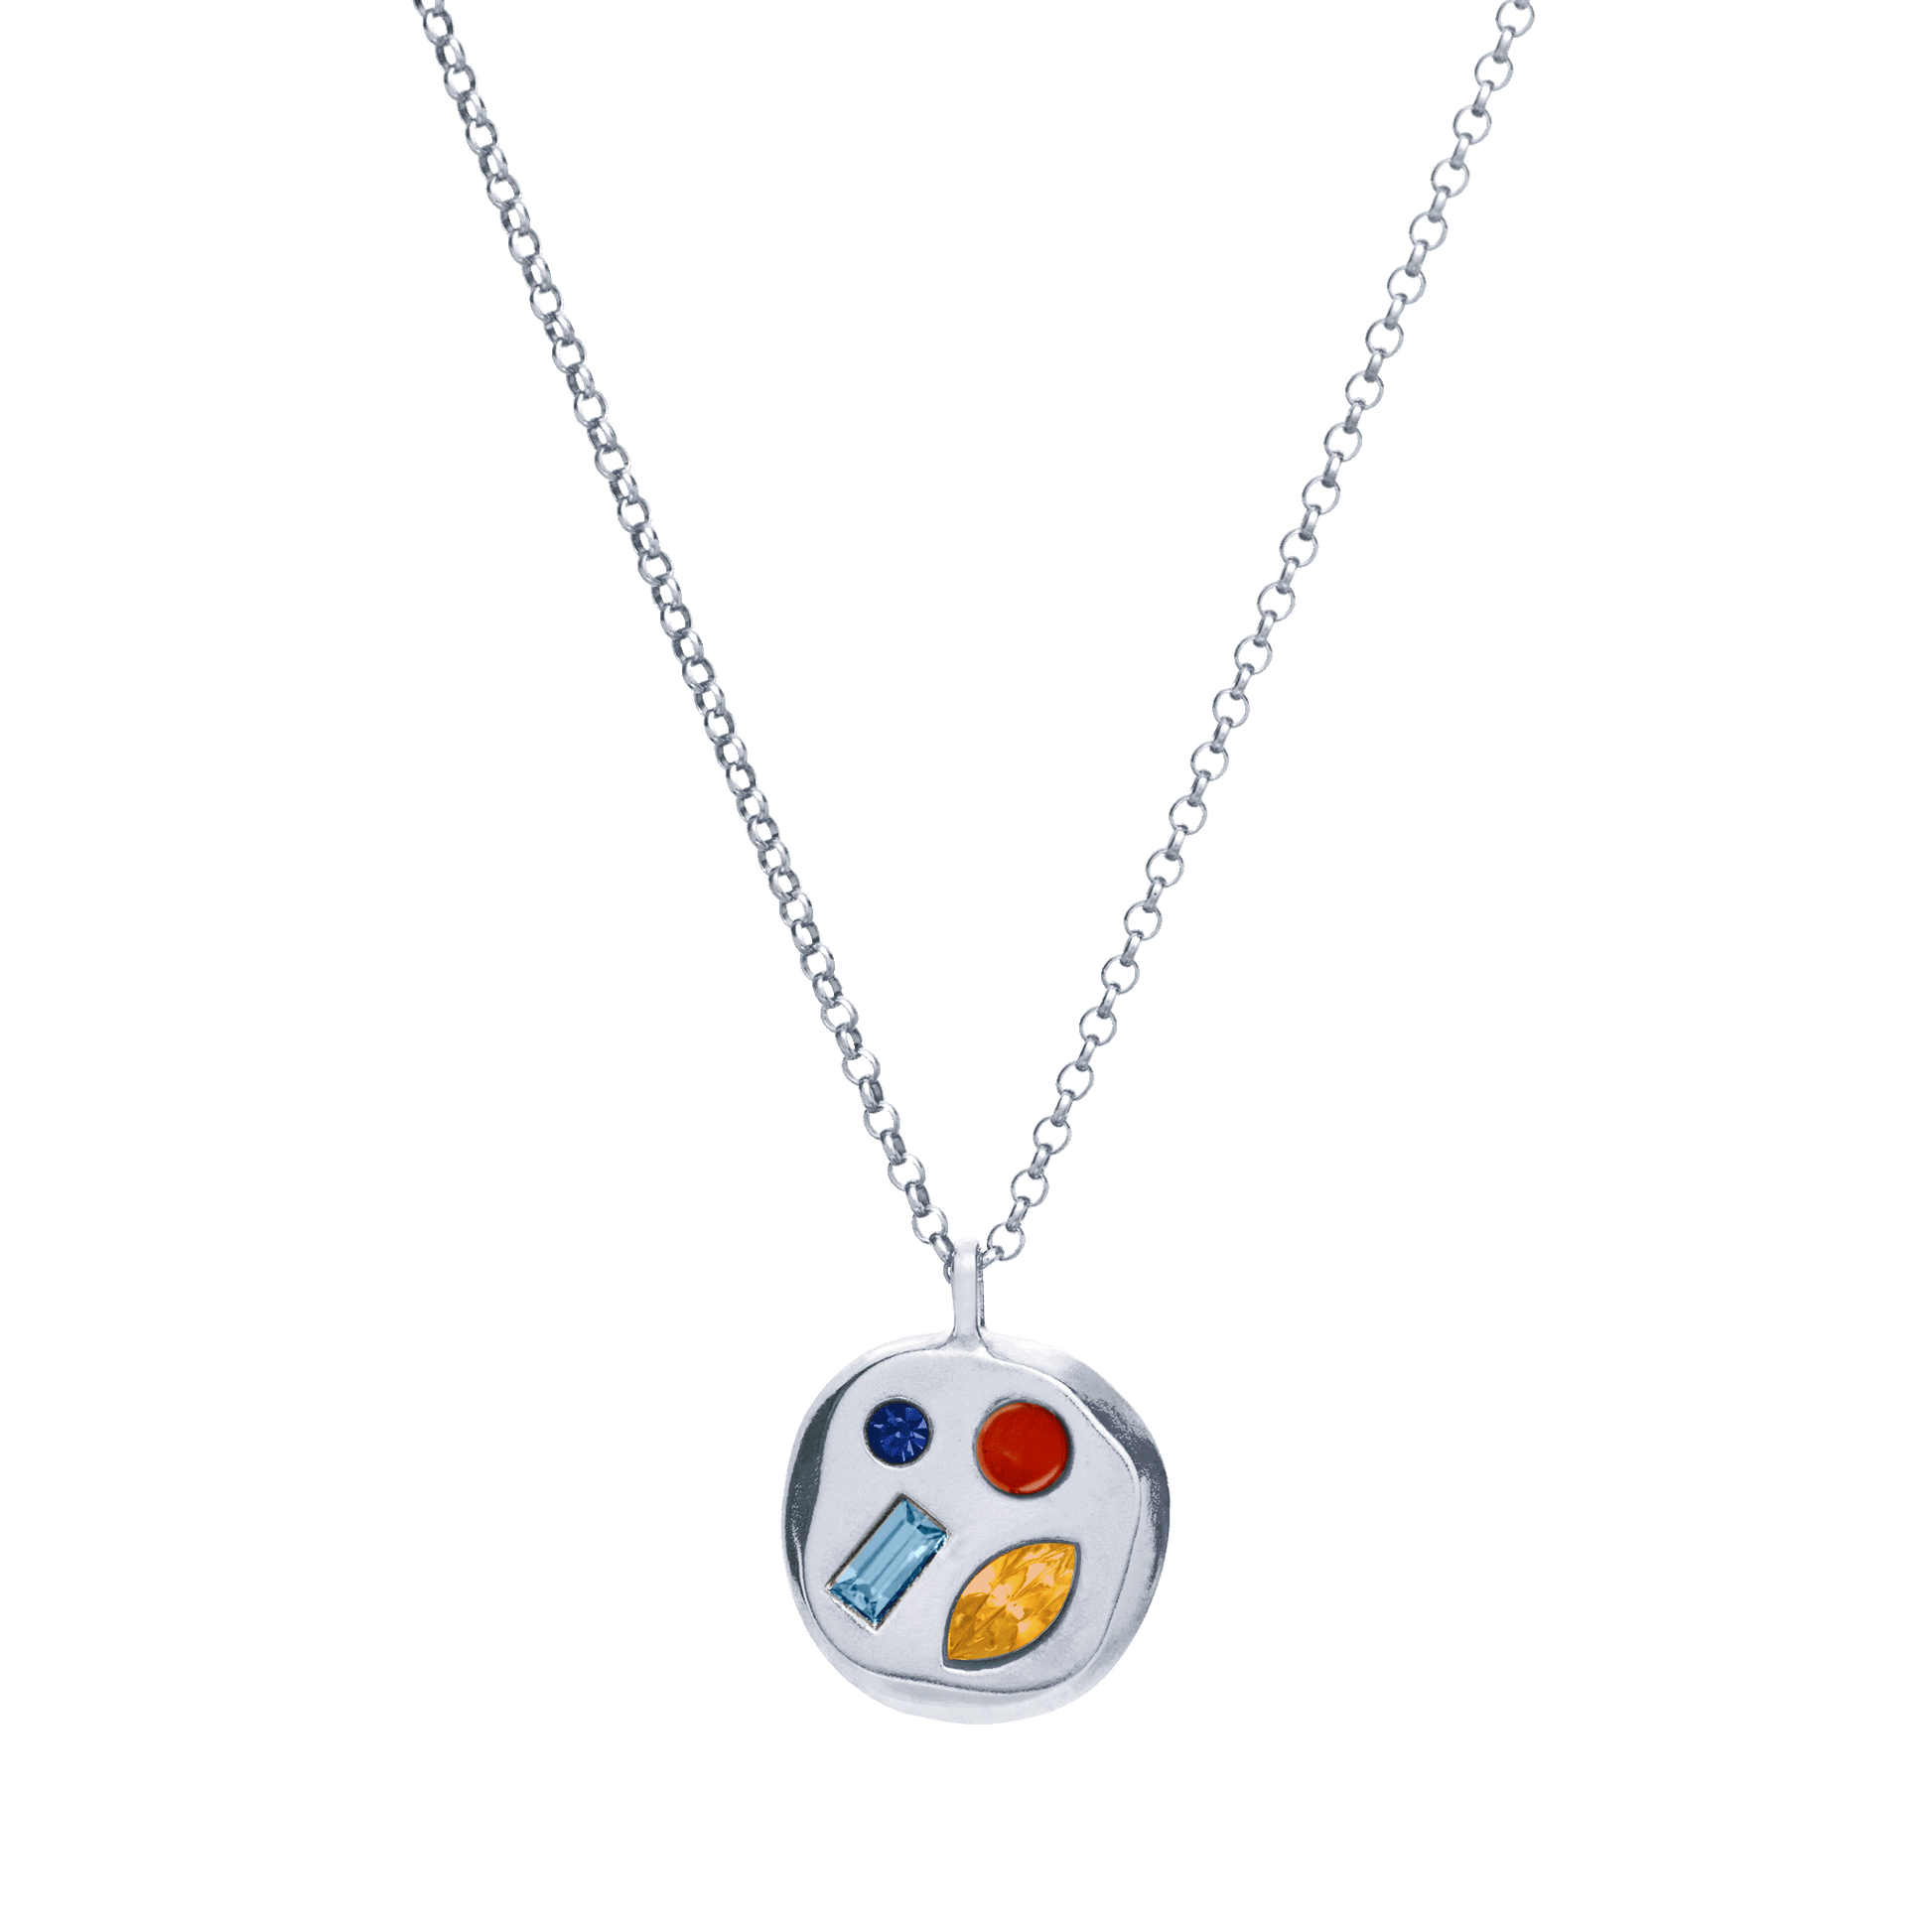 The November Seventeenth Pendant in Sterling Silver